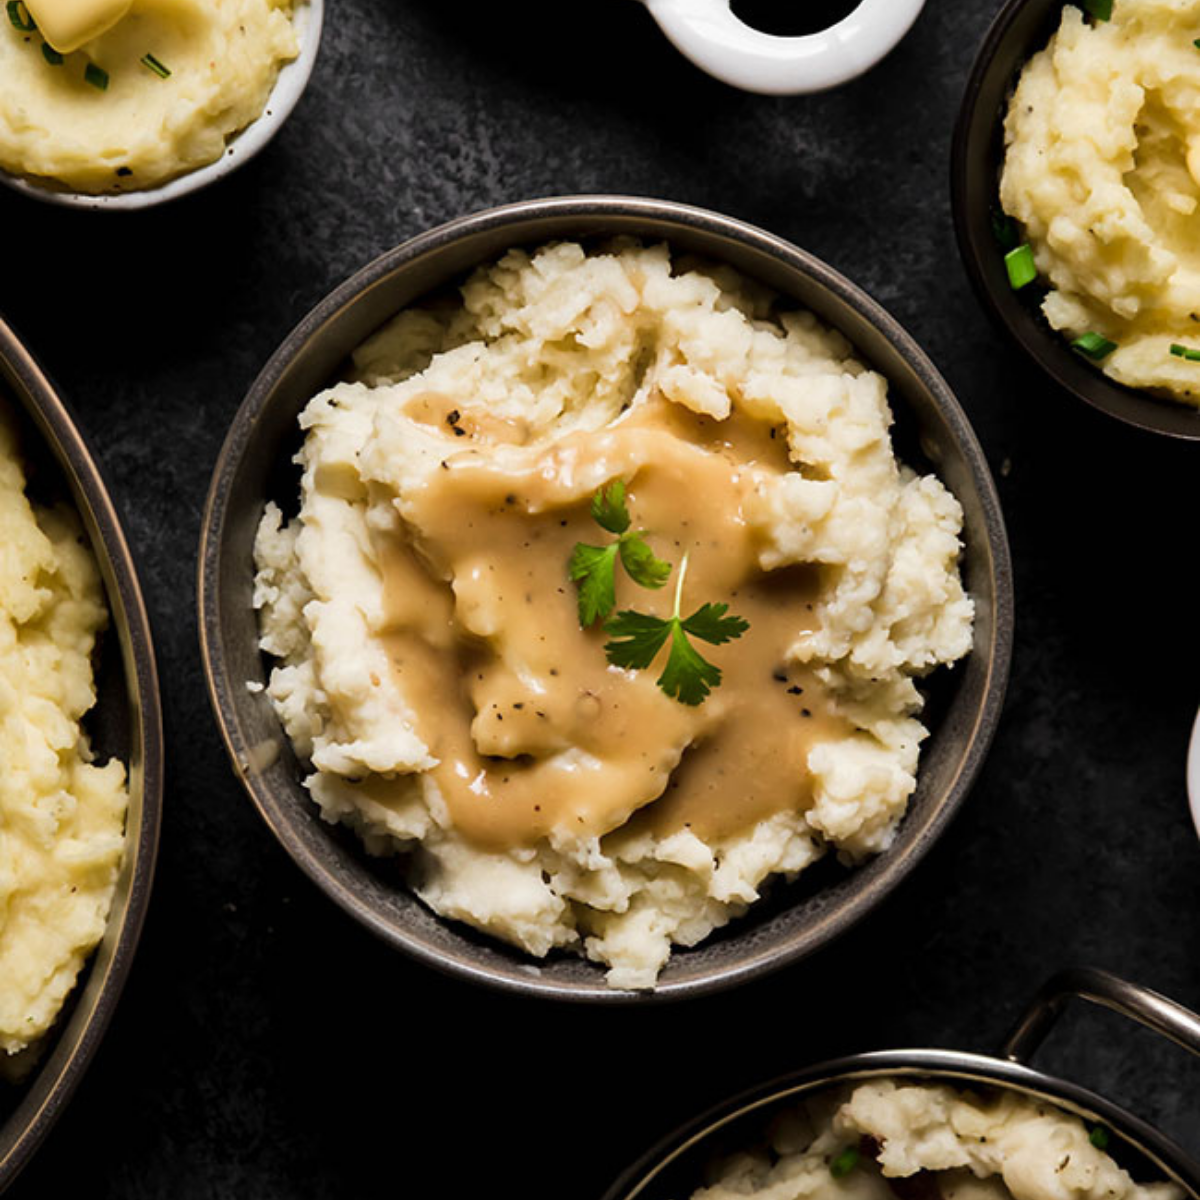 Several small bowls of mashed potatoes on a dark table with a variety of toppings like gravy, herbs, and melted butter.